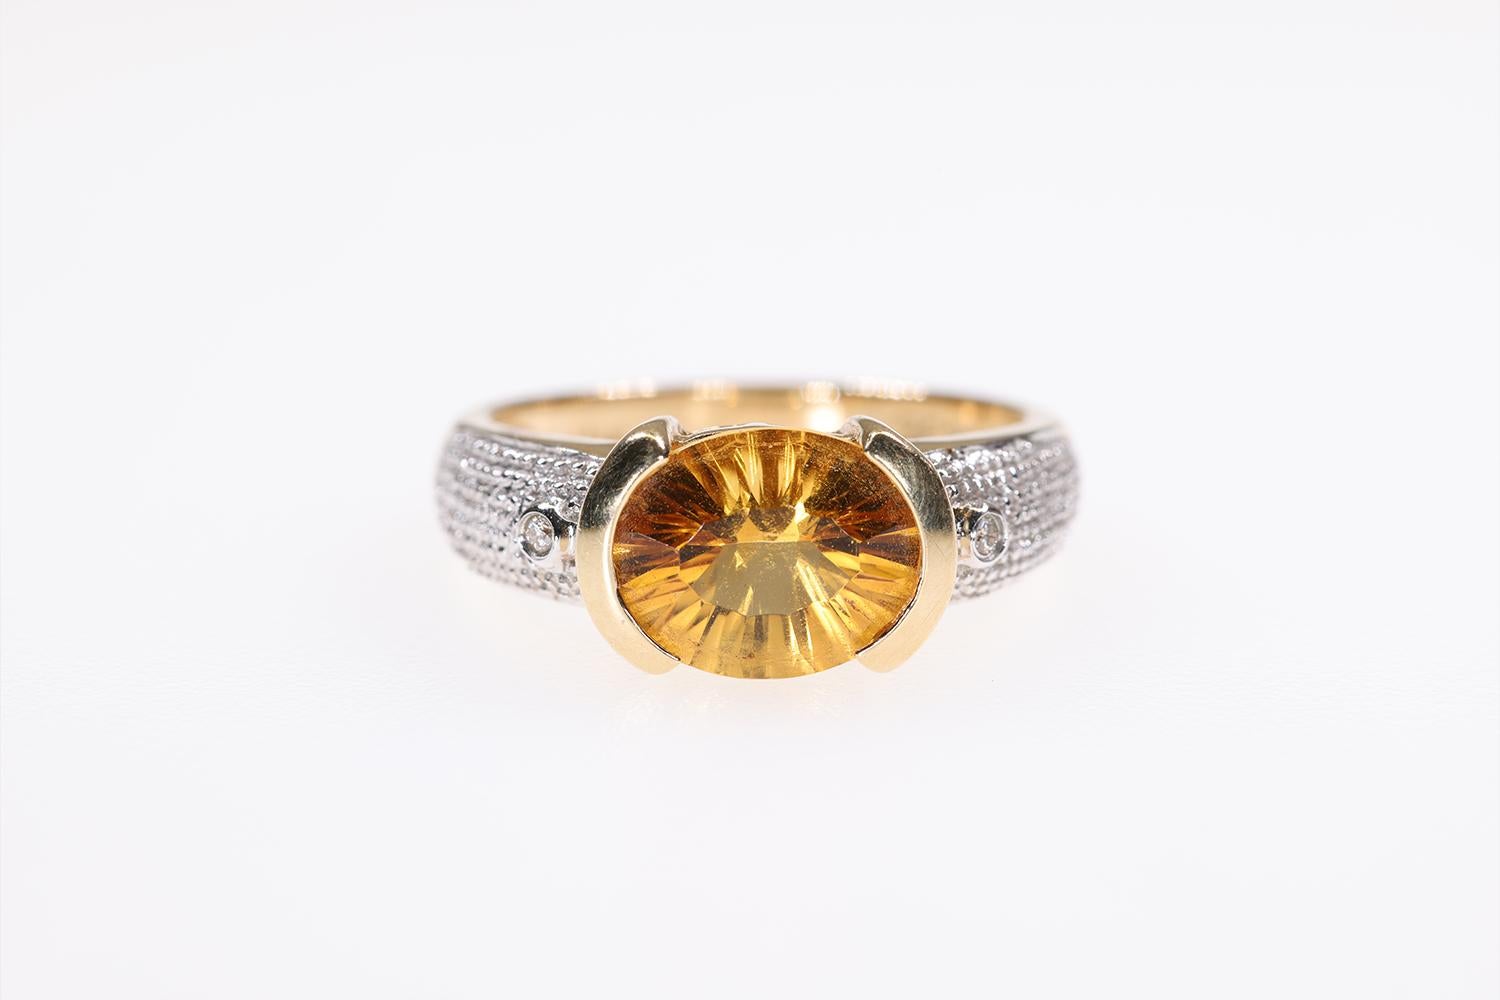 This is a beautiful LeVian Oval Citrine Fashion ring made of 14K Yellow and 14K White Gold. It is accented by two small diamonds. The center stone is a Citrine of nice deep color.